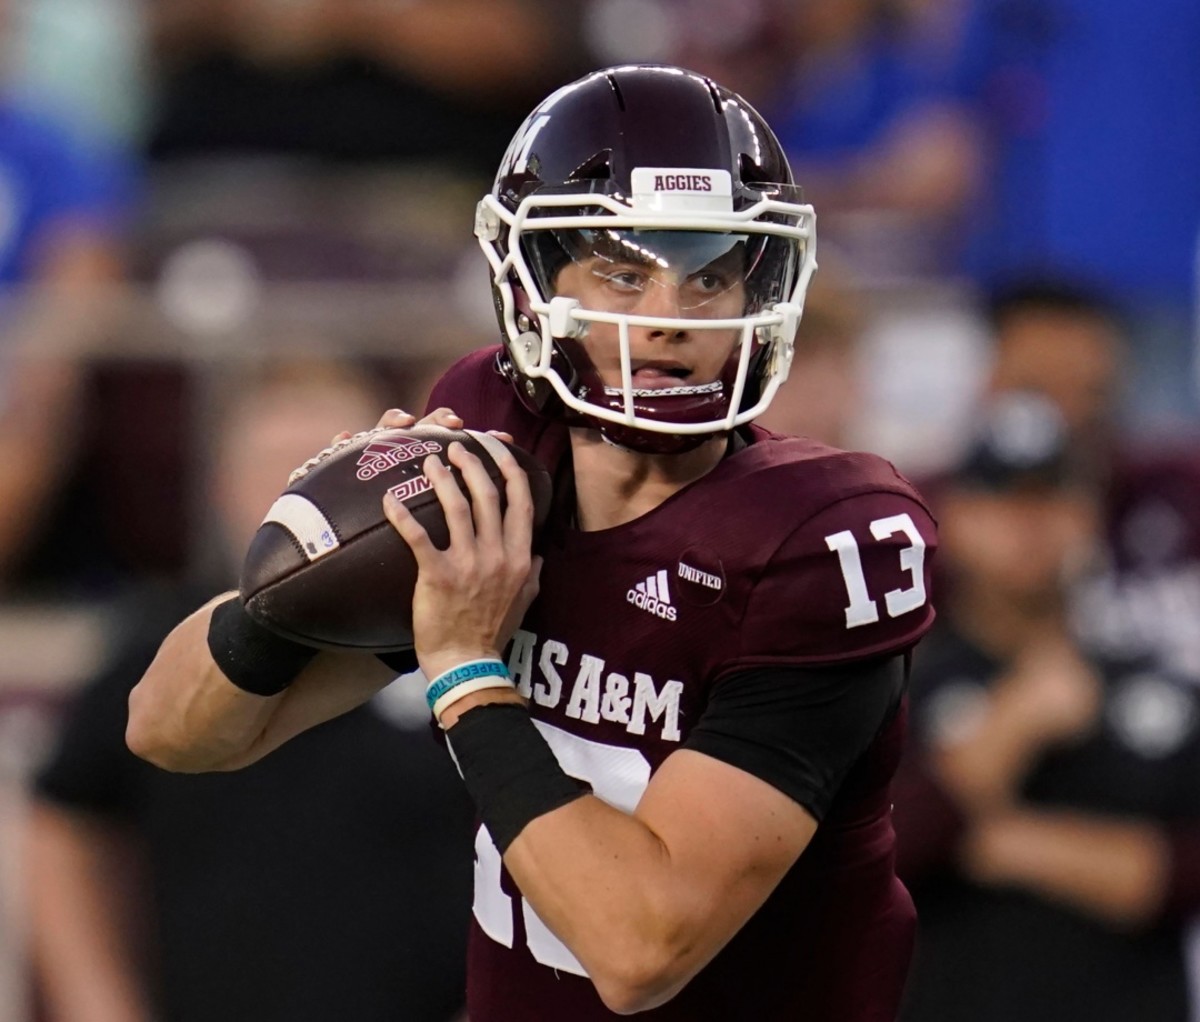 Texas A&M quarterback Haynes King holds the ball ready to pass during a college football game